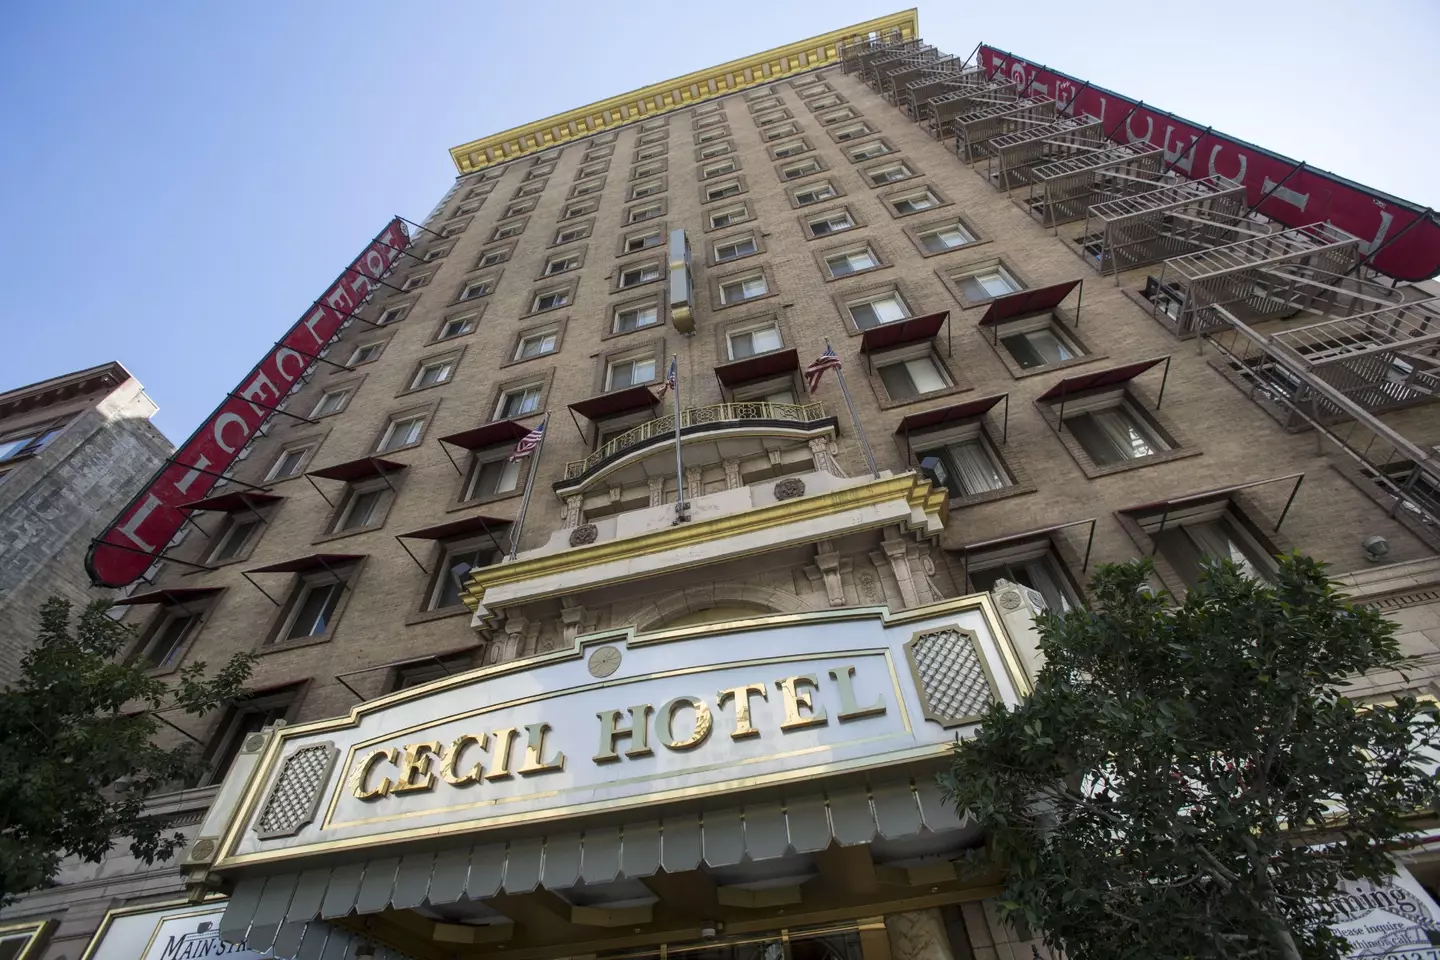 The student disappeared at the Cecil Hotel in 2013.